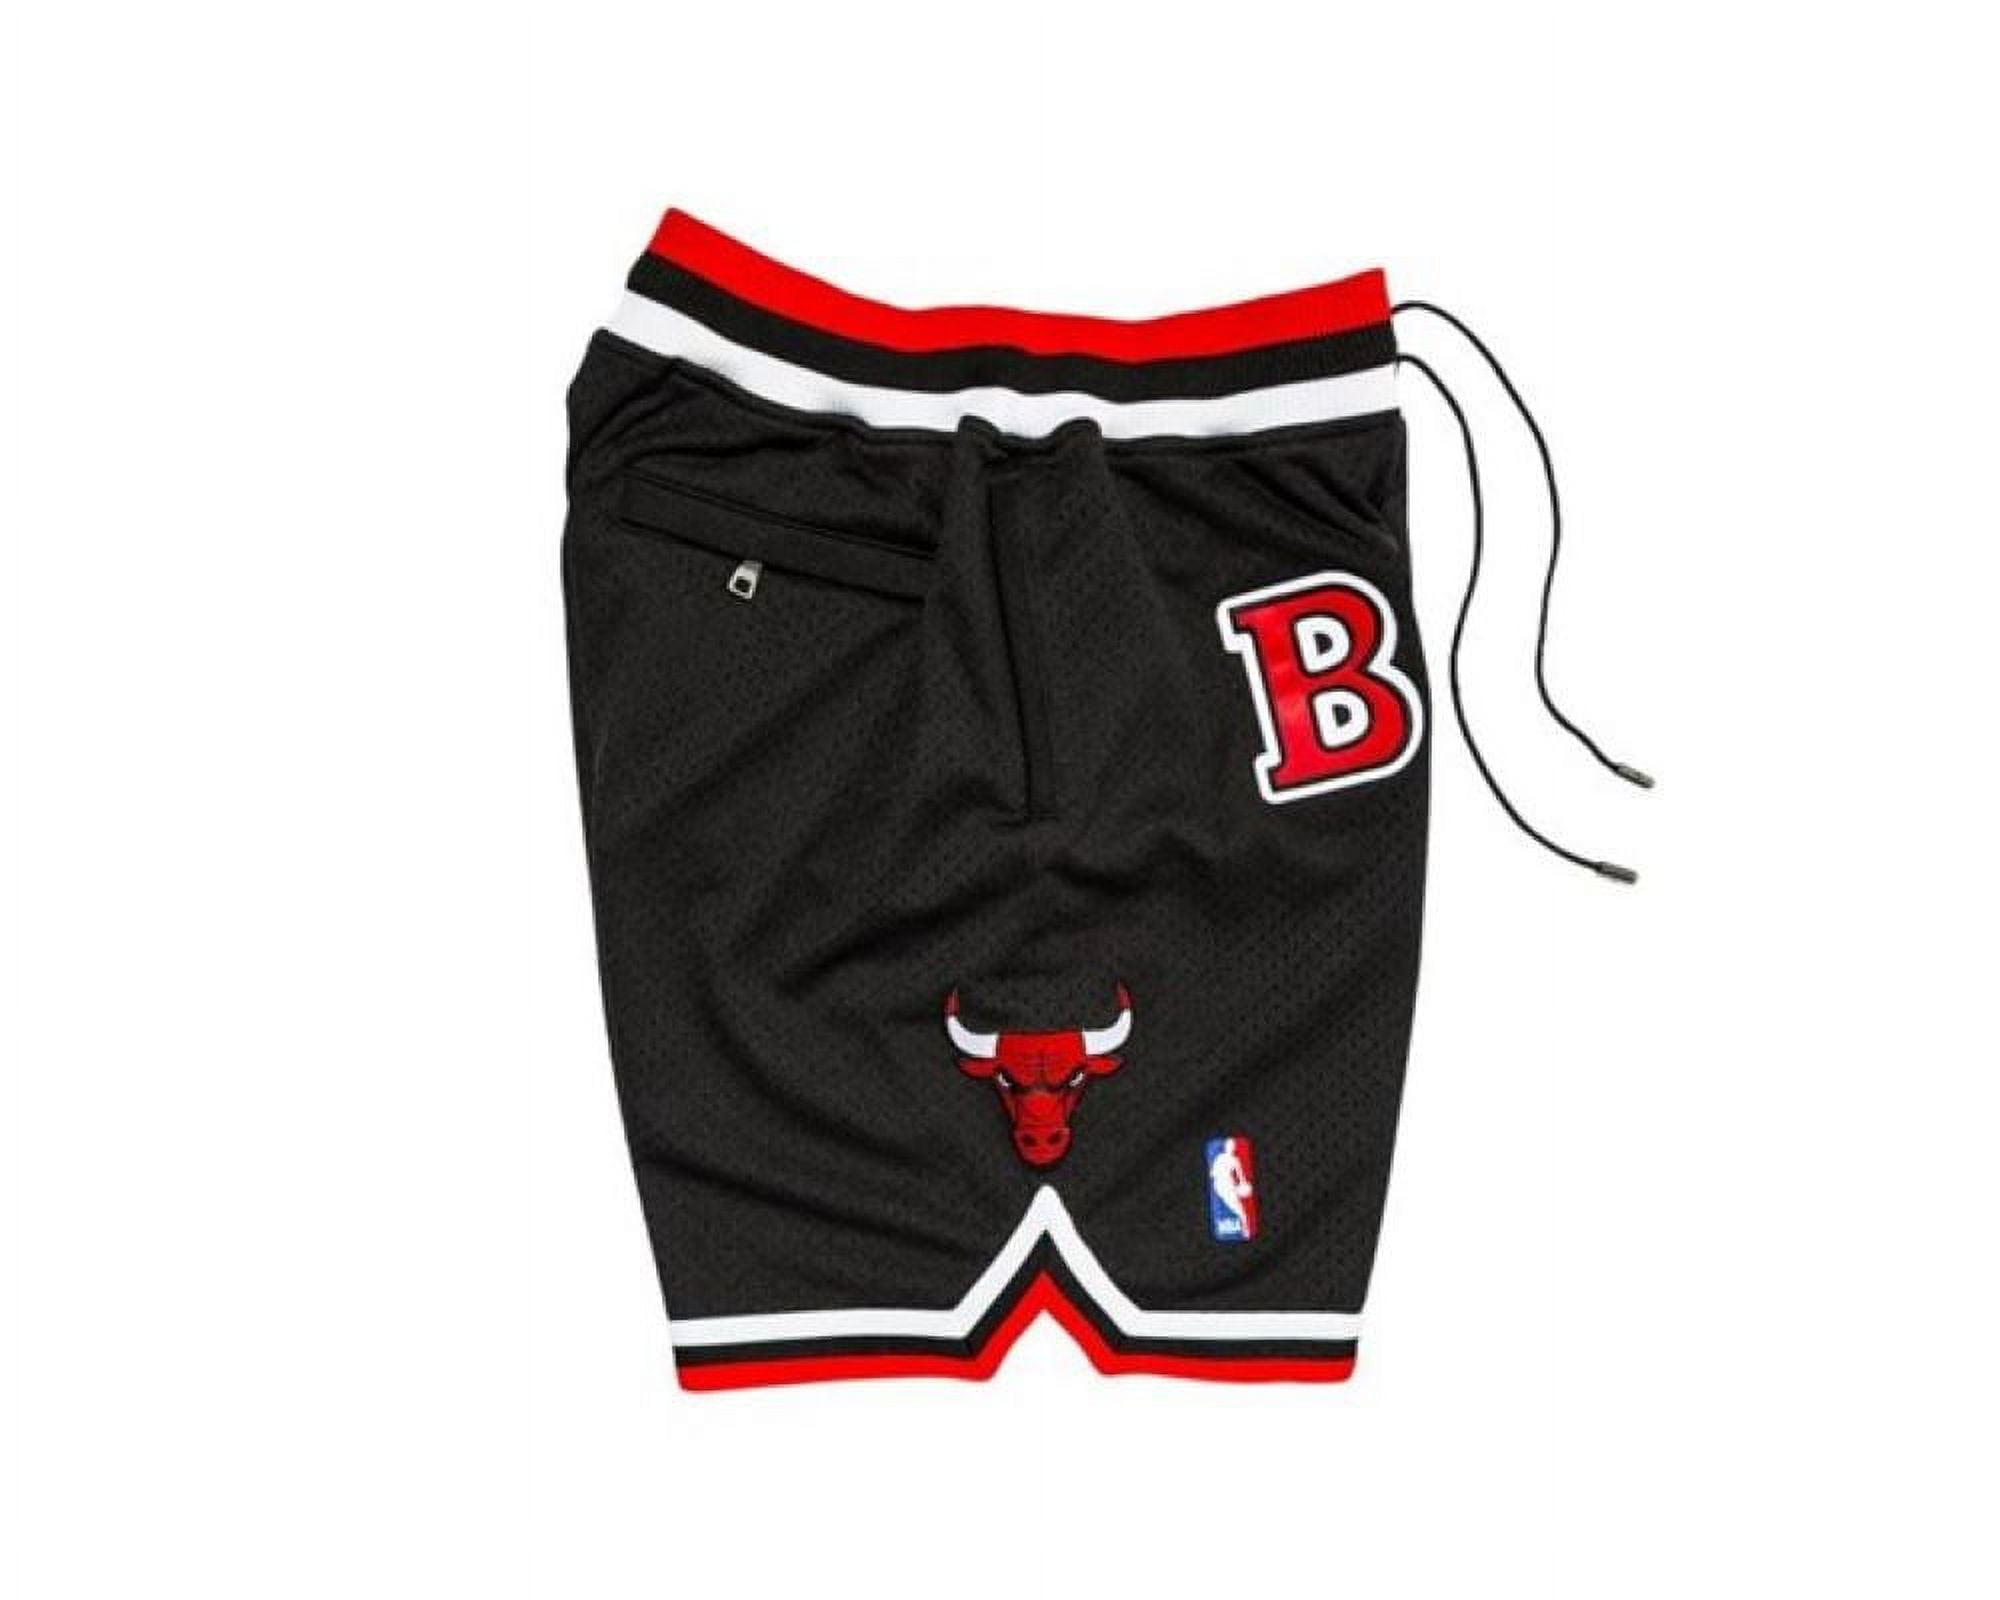 JUST DON® on Instagram: @chicagobulls Just Don shorts available online &  in store now 🏀✨ Justdon.com 170 N Sangamon St Chicago, IL 60606